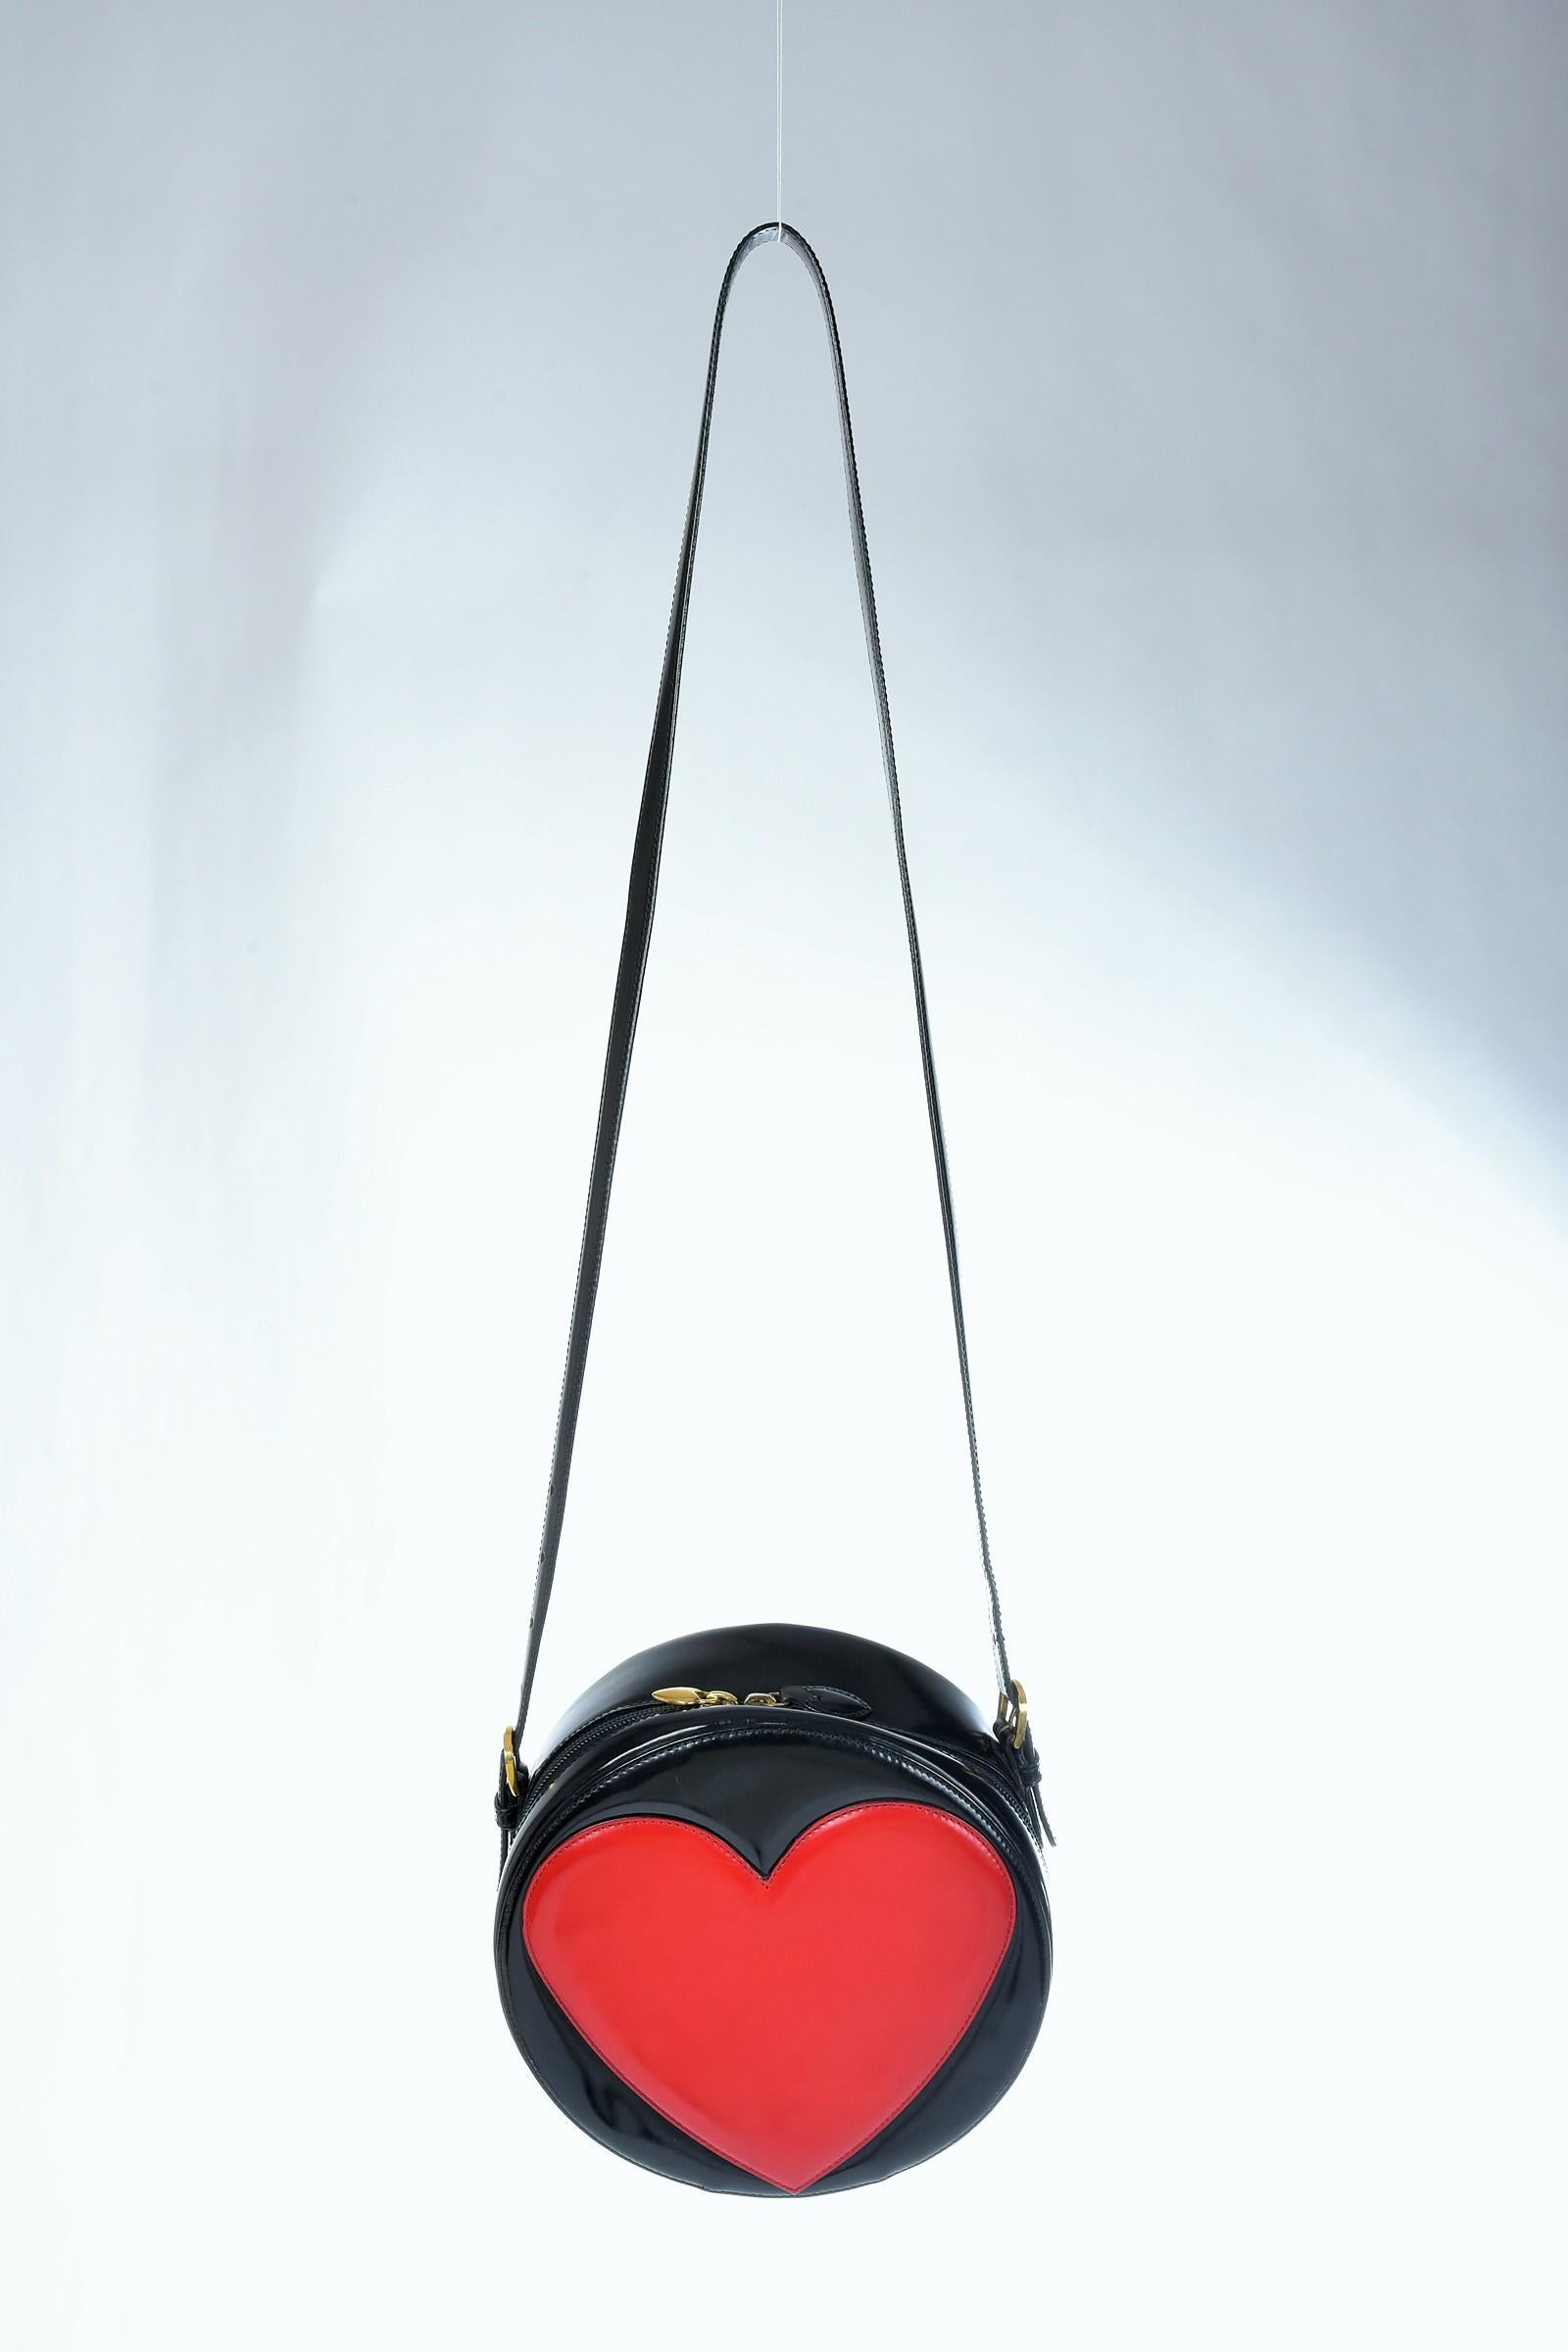 Circa 1990

Italy

Rare small tambourine bag by Franco Moschino (1950-1994) with the famous heart applied in reference to Pop Culture and dating from the early 1990s. Black varnished vinyl with zip closure on the side with a brass heart puller.